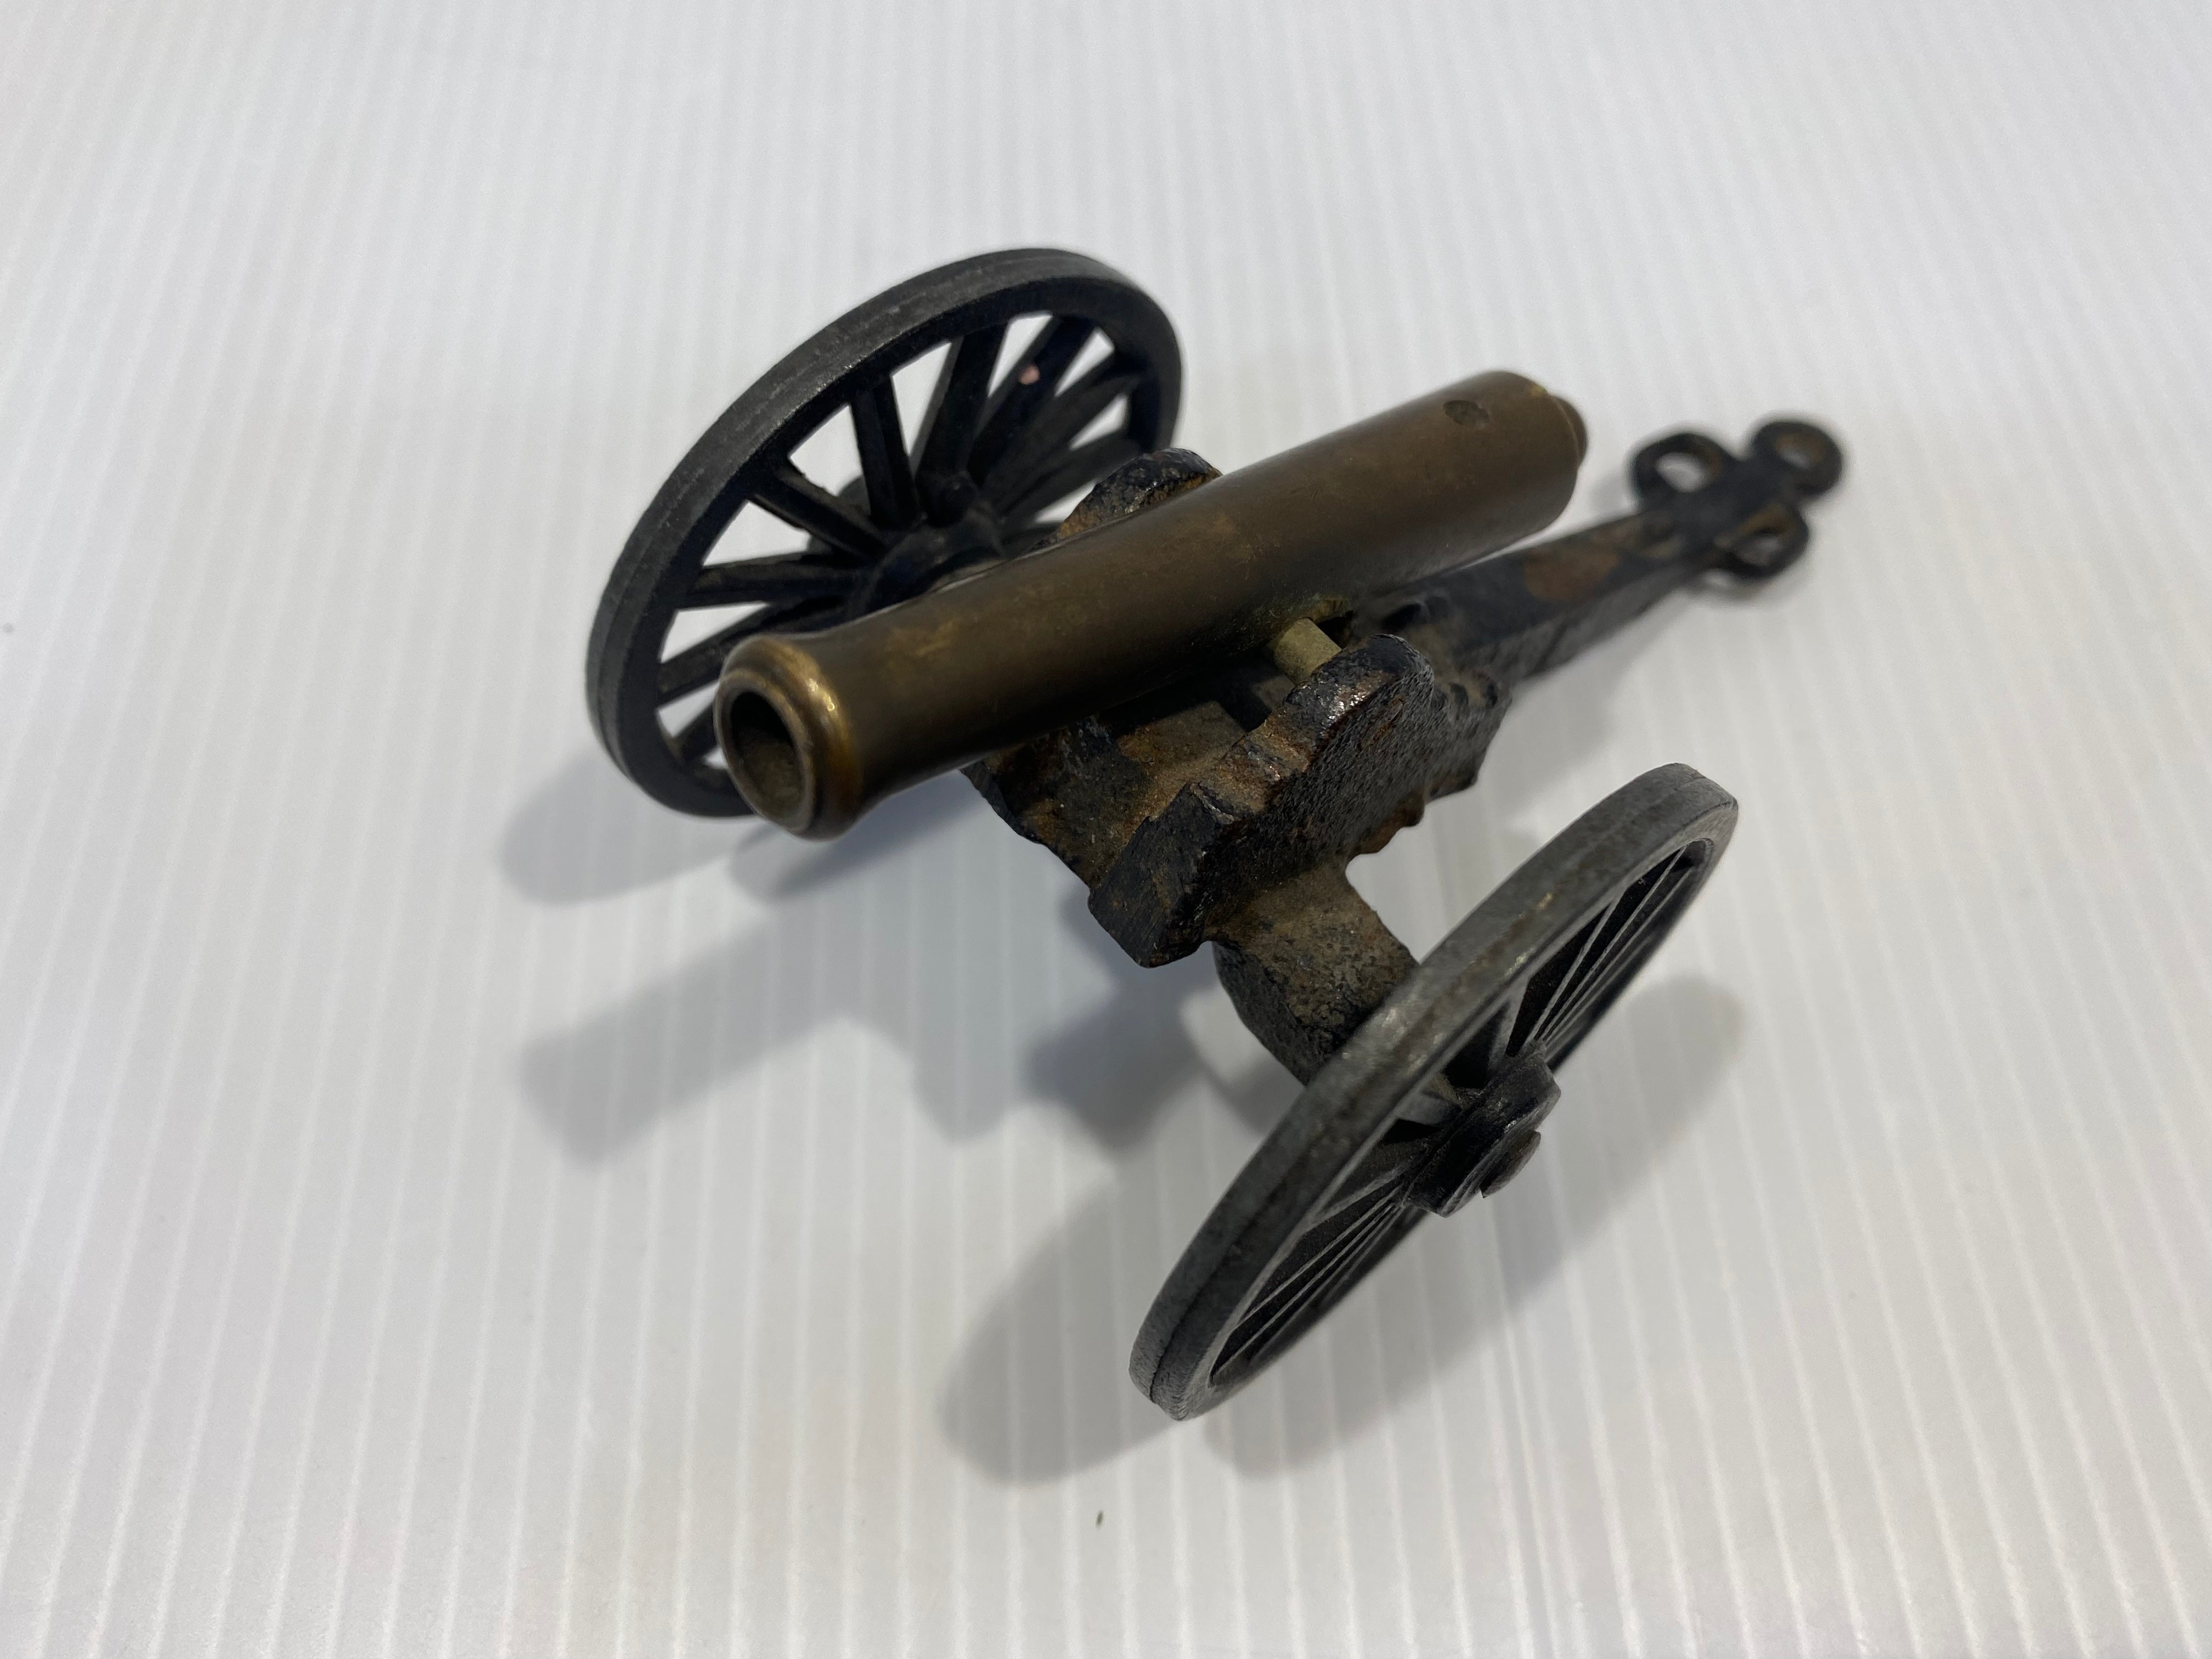 MCFO cast iron and brass model toy